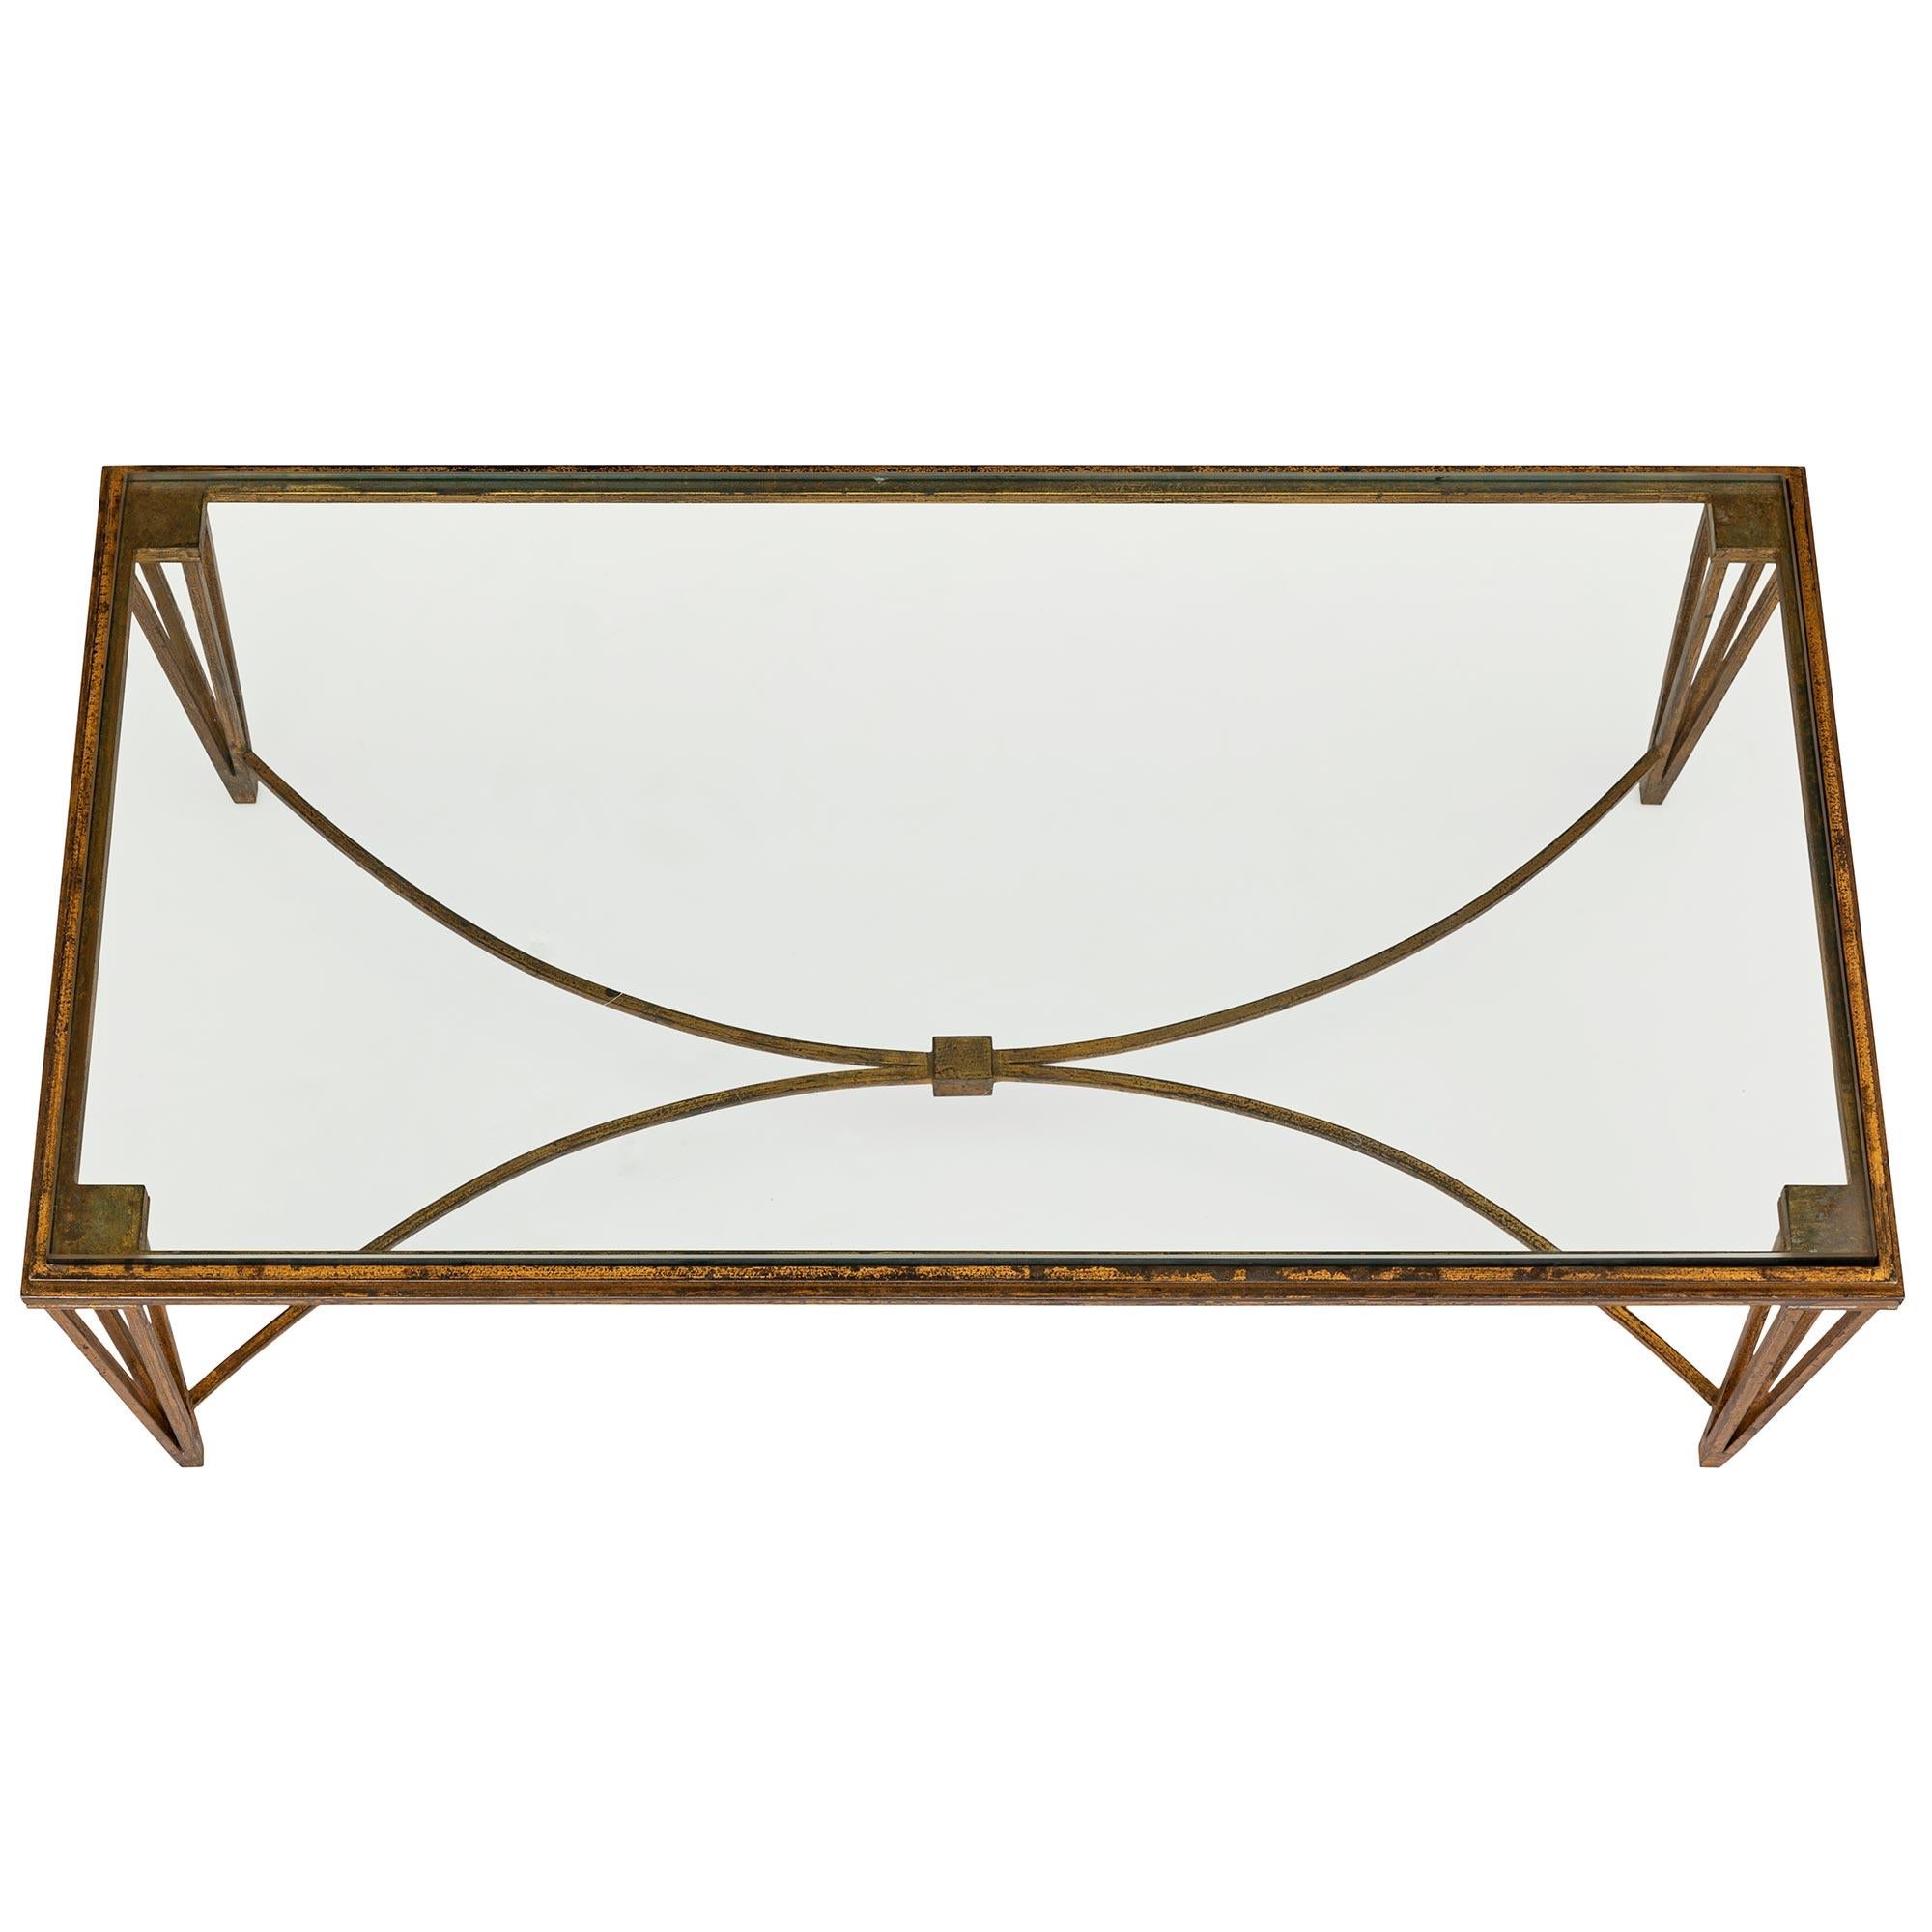 An elegant and most decorative French Turn of the century Louis XVI st. gilt iron and glass coffee table by Maison Ramsey. The coffee table is raised by beautiful pierced tapered legs each displaying four unique square supports and connected by a